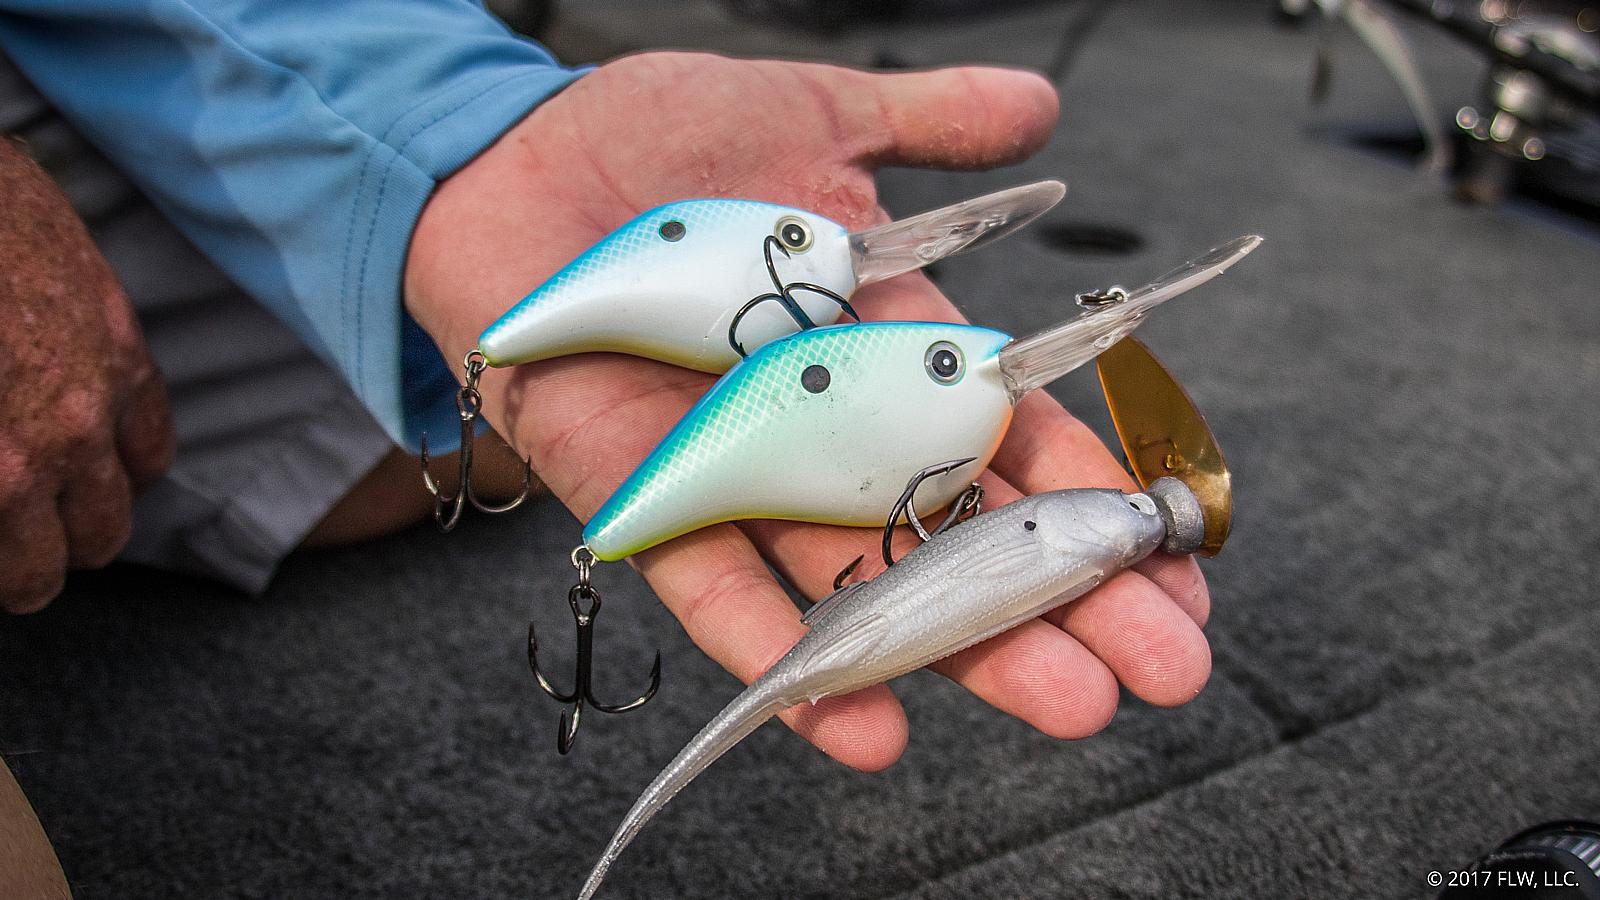 Major League Fishing - Zoom Baits have been catching fish since